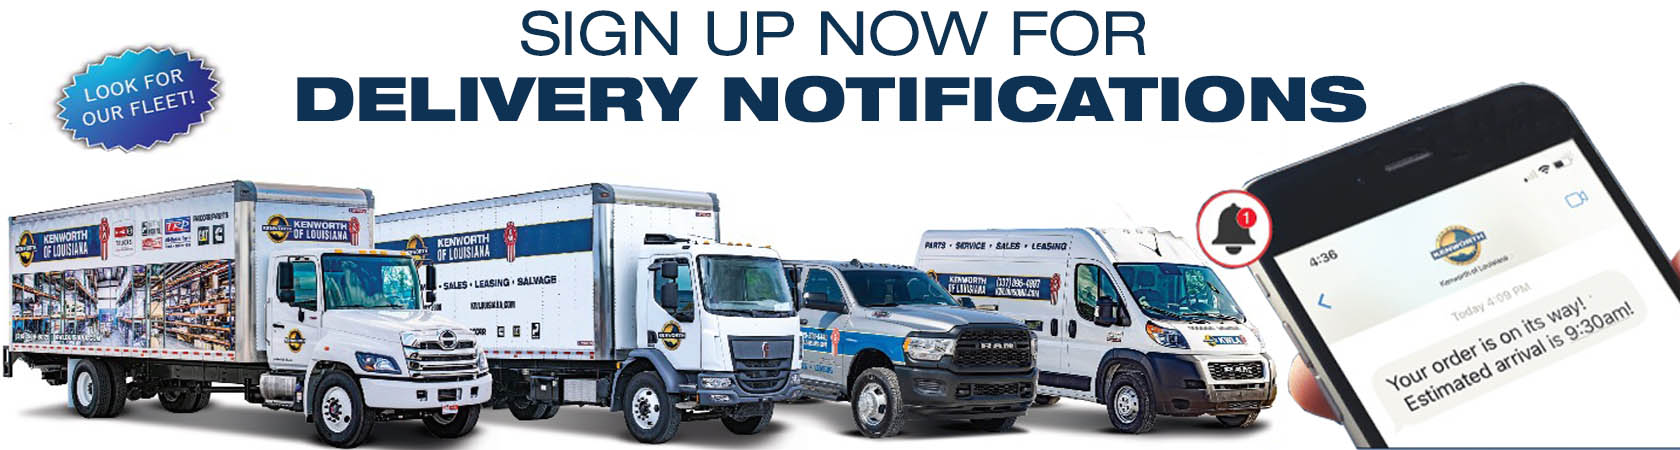 Sign Up Now for Delivery Notifications